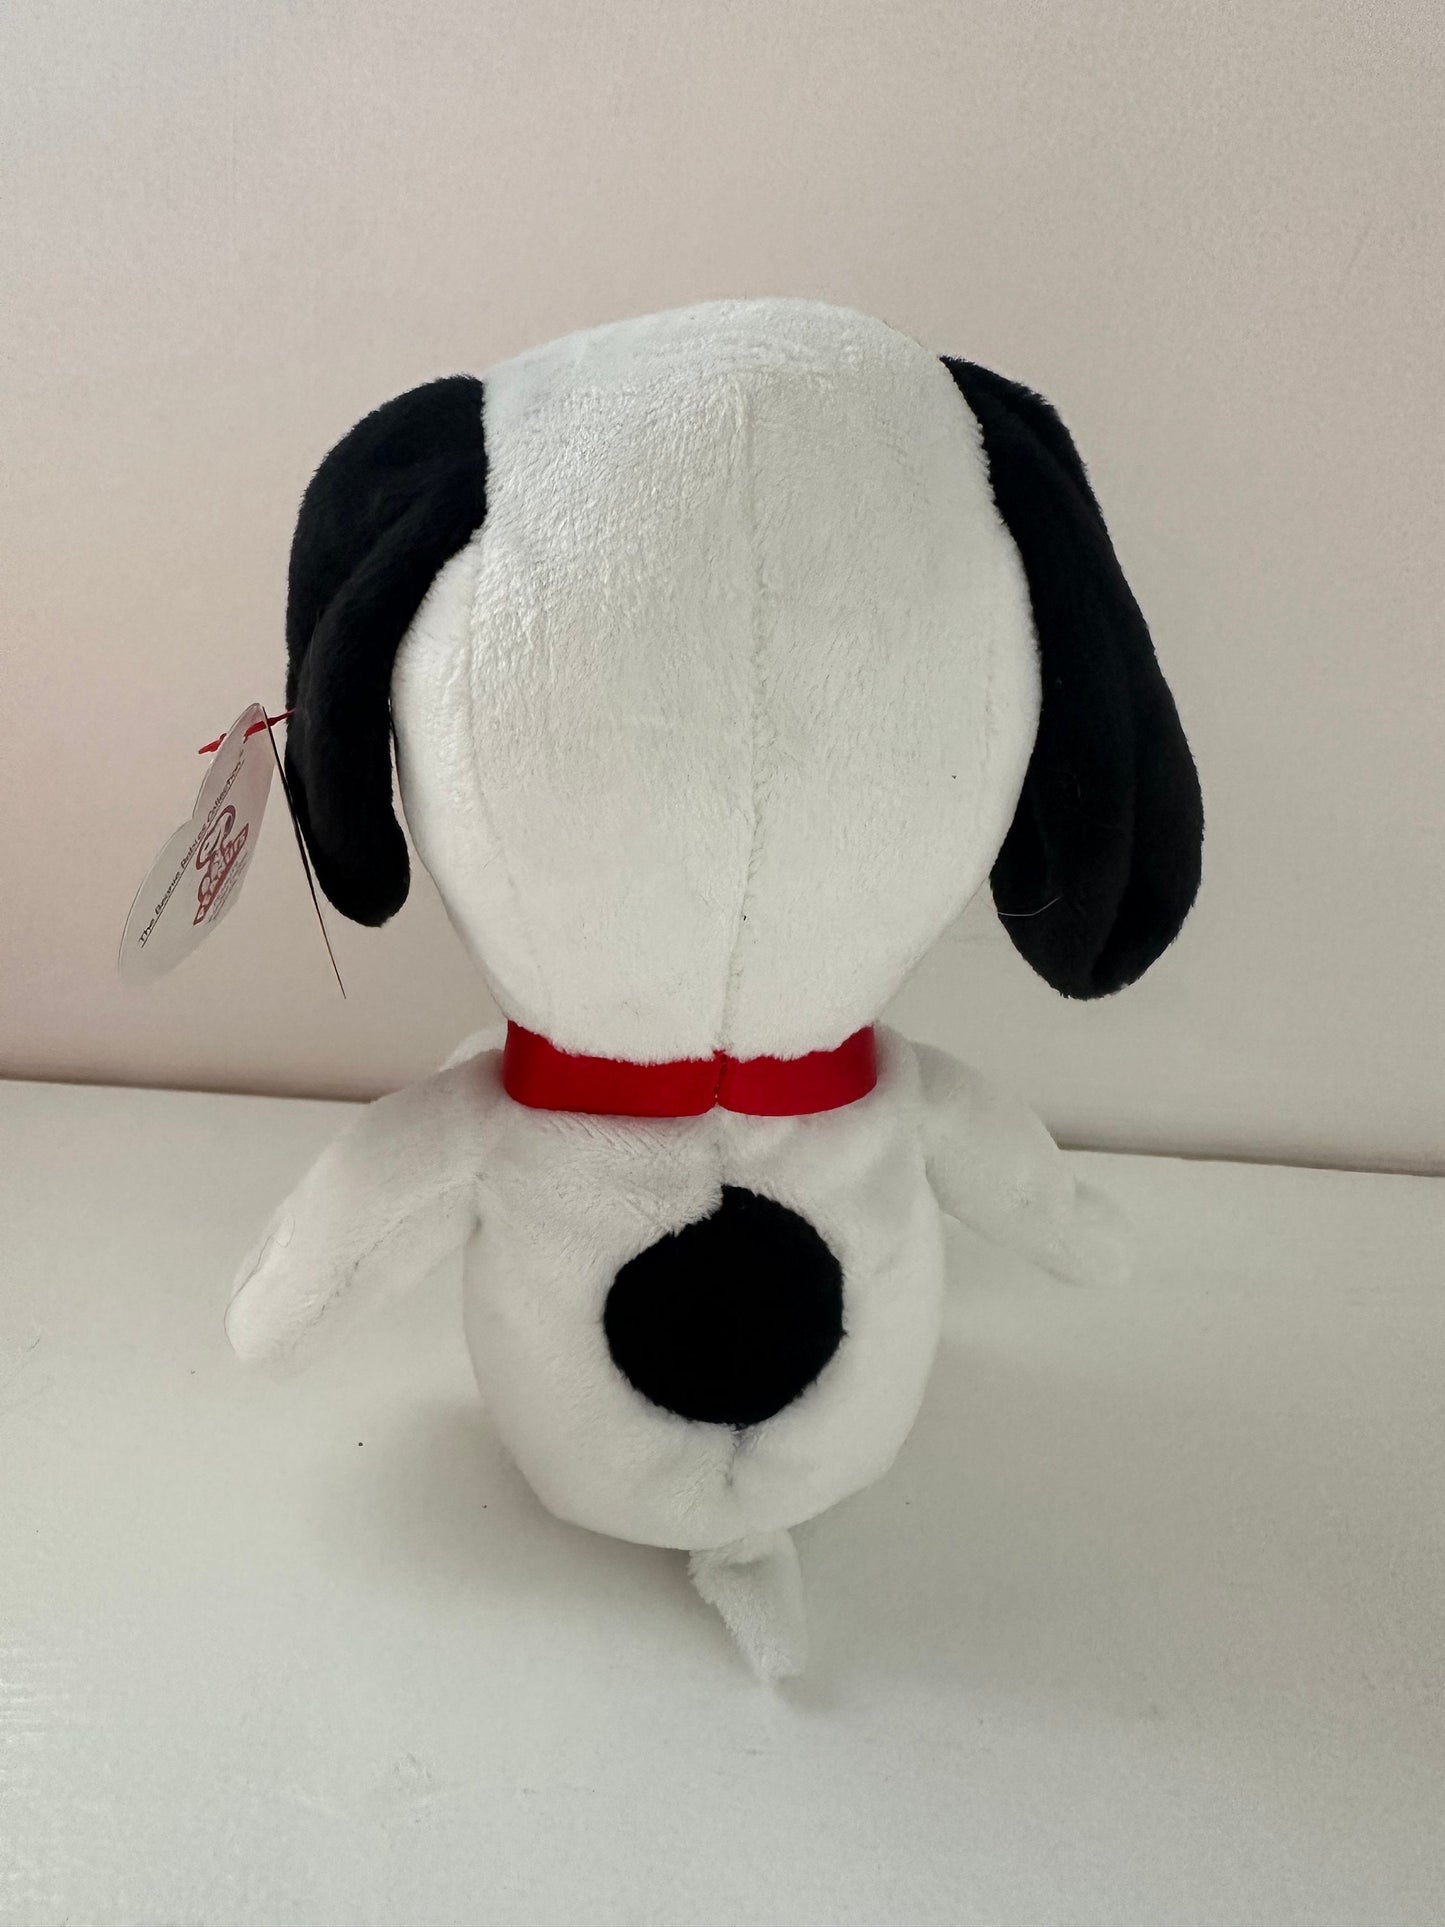 Ty Beanie Baby “Snoopy” the Dog, Character from Peanuts, Music not working (6 inch)